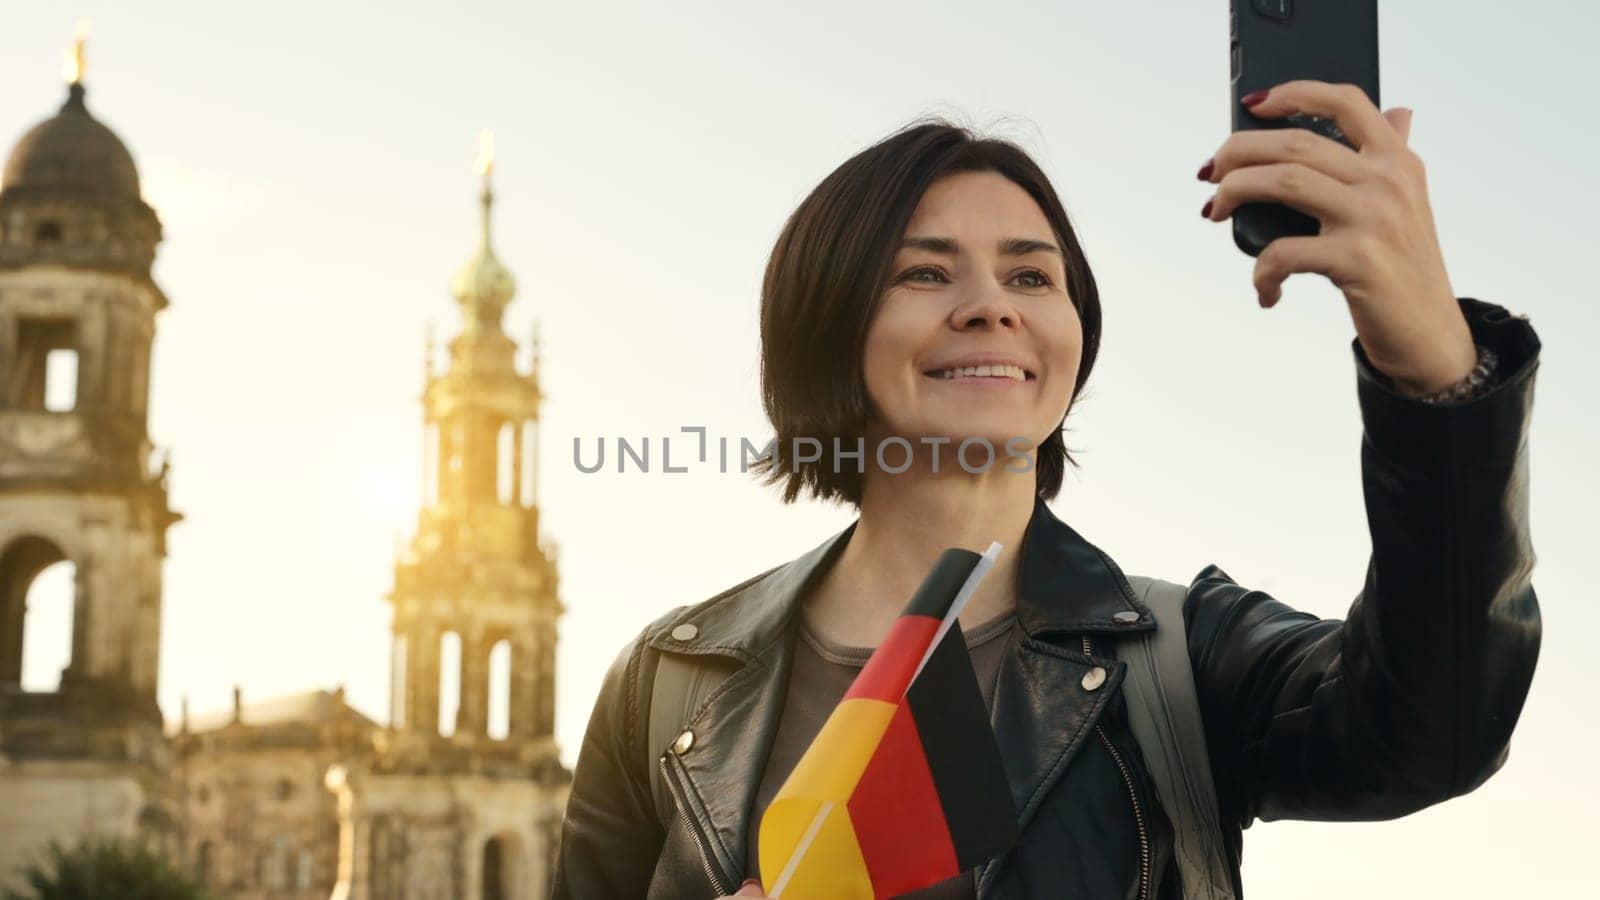 Young Woman Takes Selfie With German Flag In Hand, Against Blurred City Backdrop In Autumn